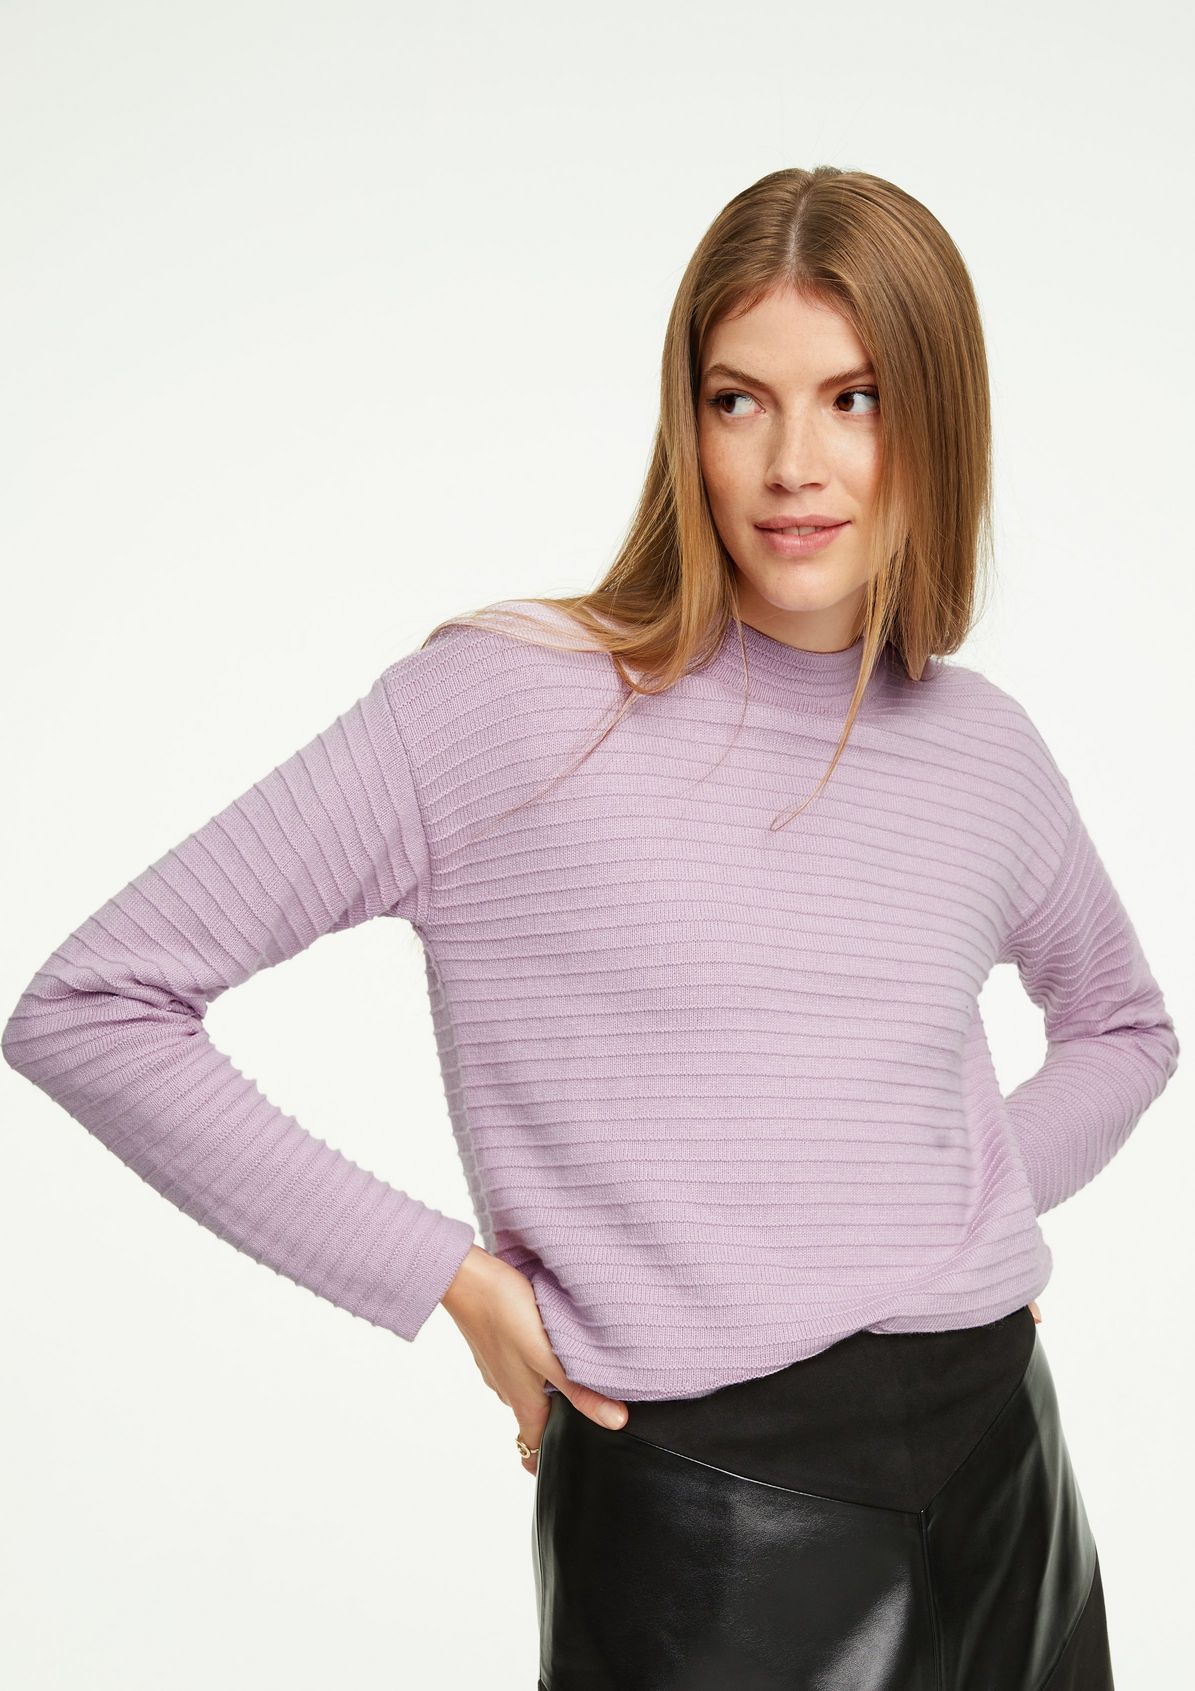 Blended wool jumper with texture from comma